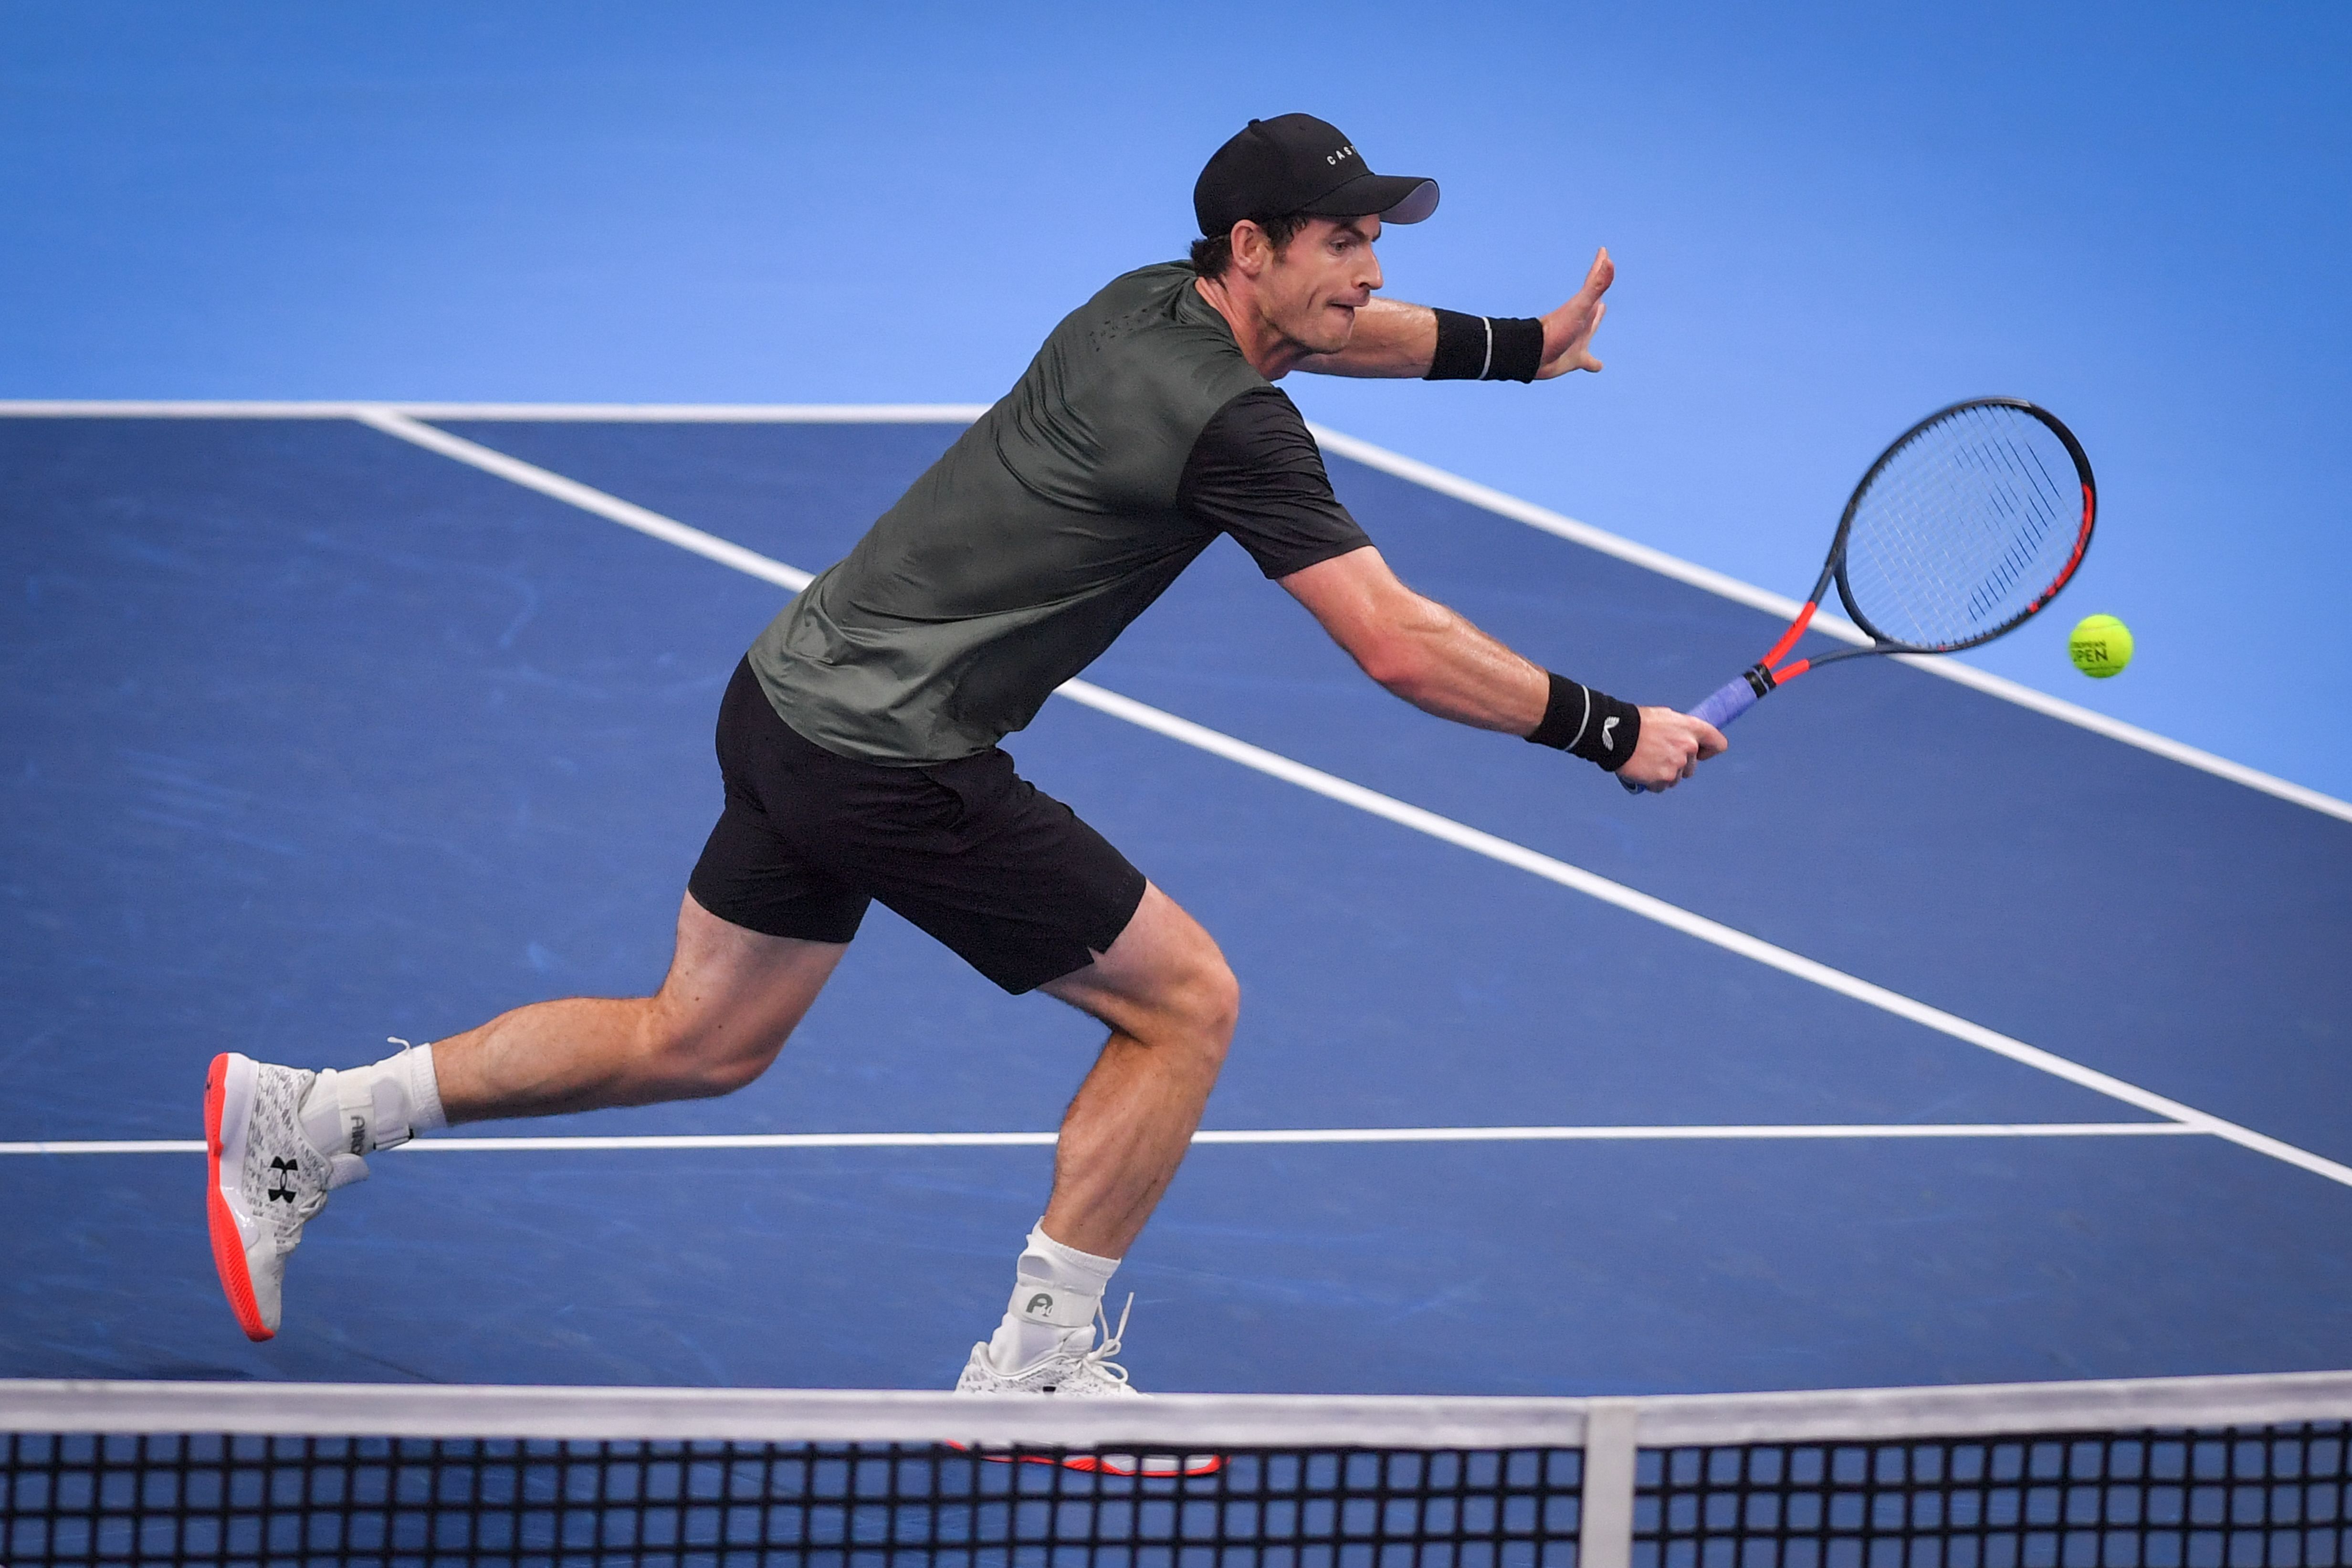 Britain's Andy Murray returns a shot during a tennis match against Uruguay's Pablo Cuevas, in the second round of the men's singles tournament at the European Open ATP Antwerp. (AFP Photo)